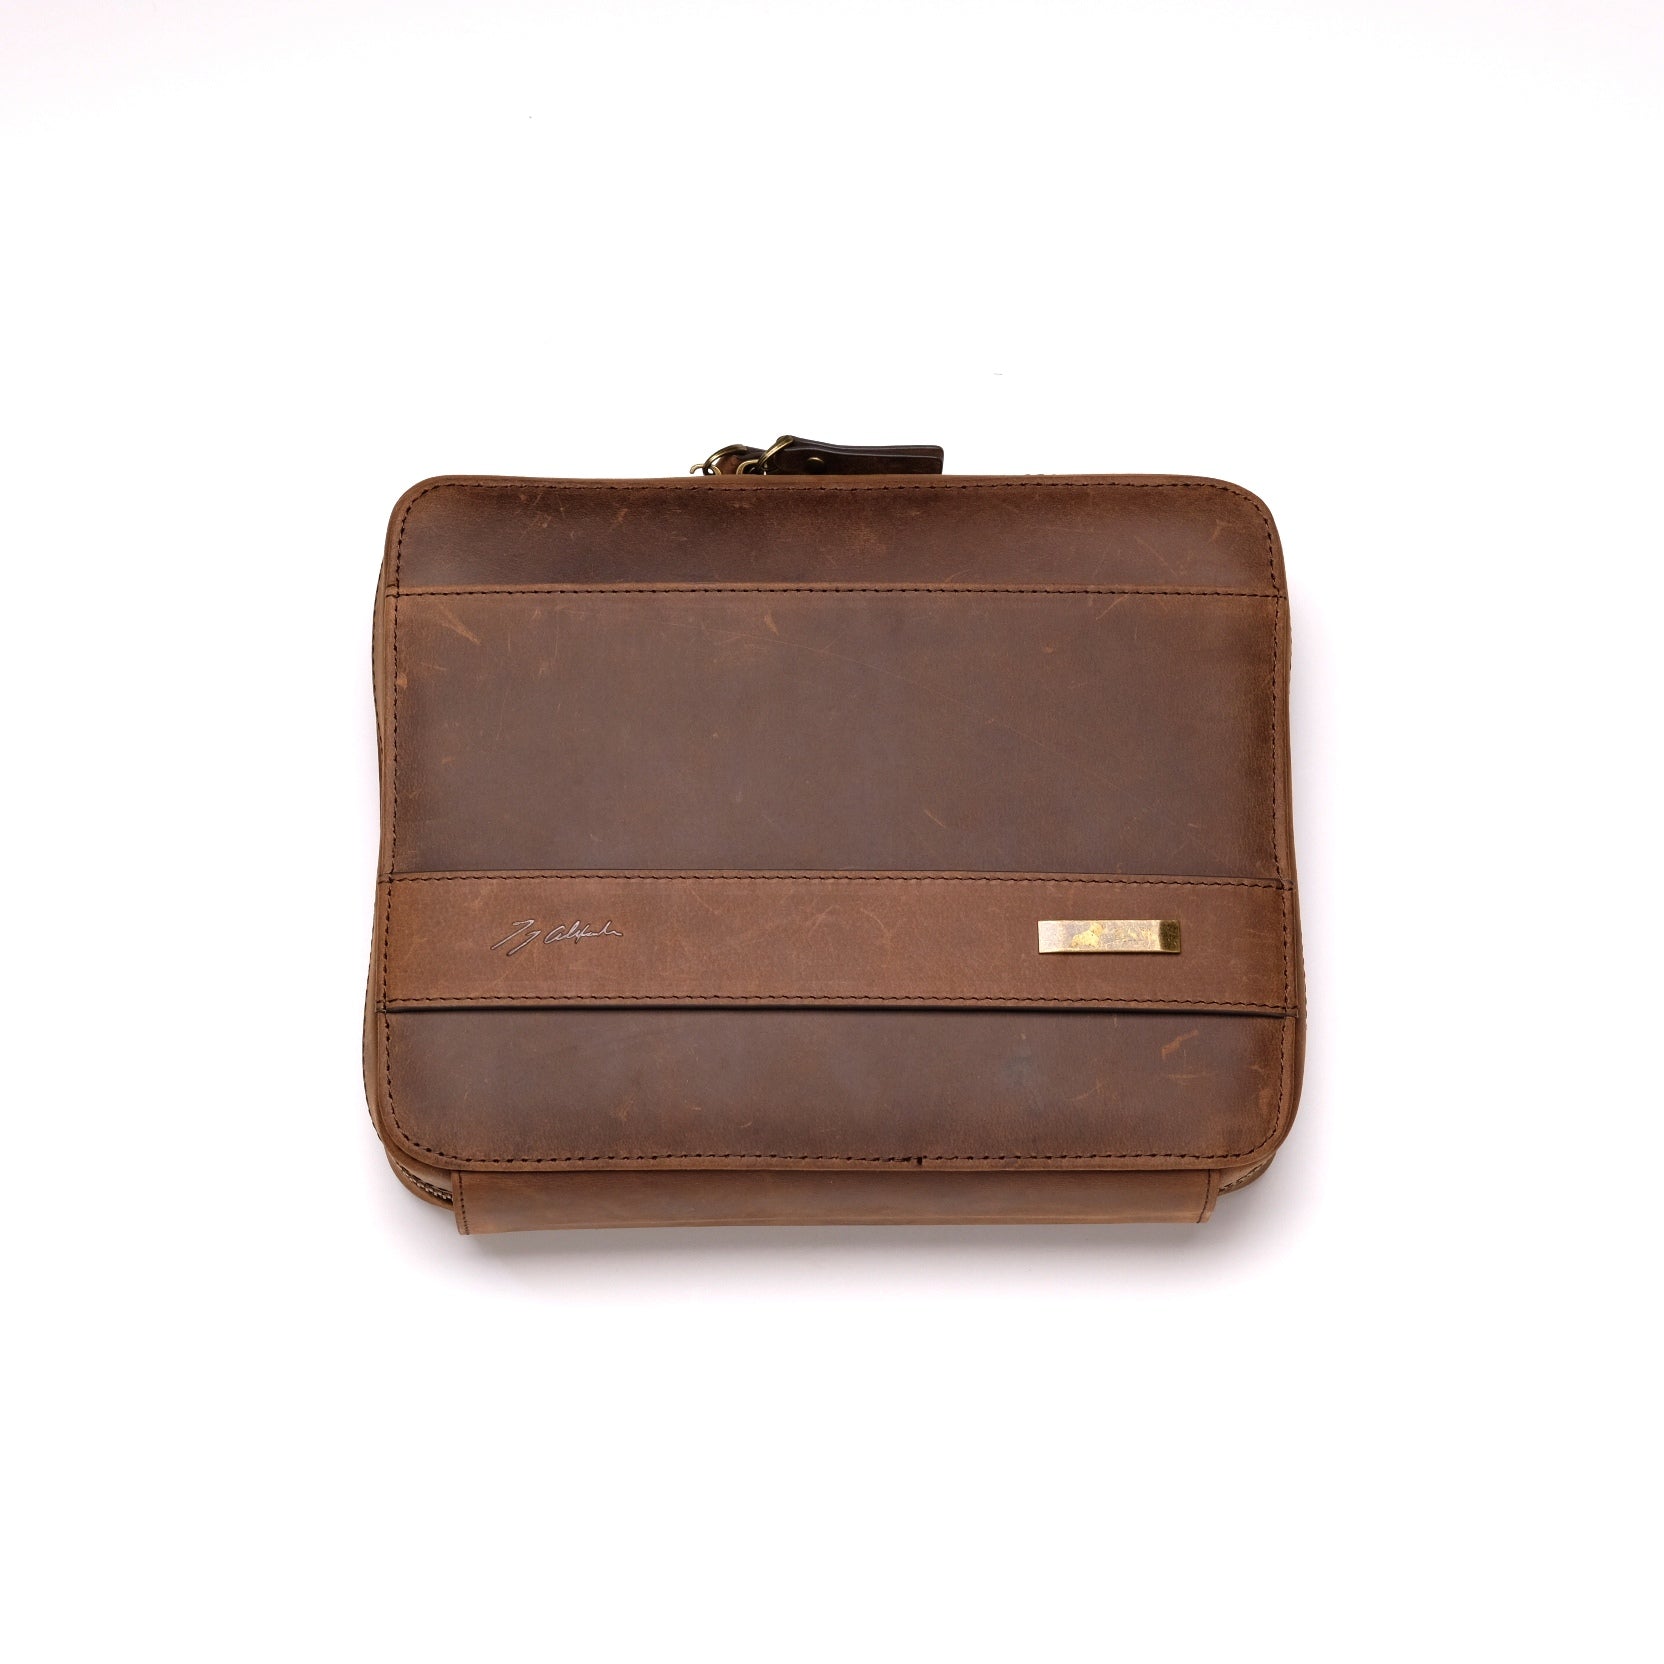 W.I.S. Kit (Brown Leather)